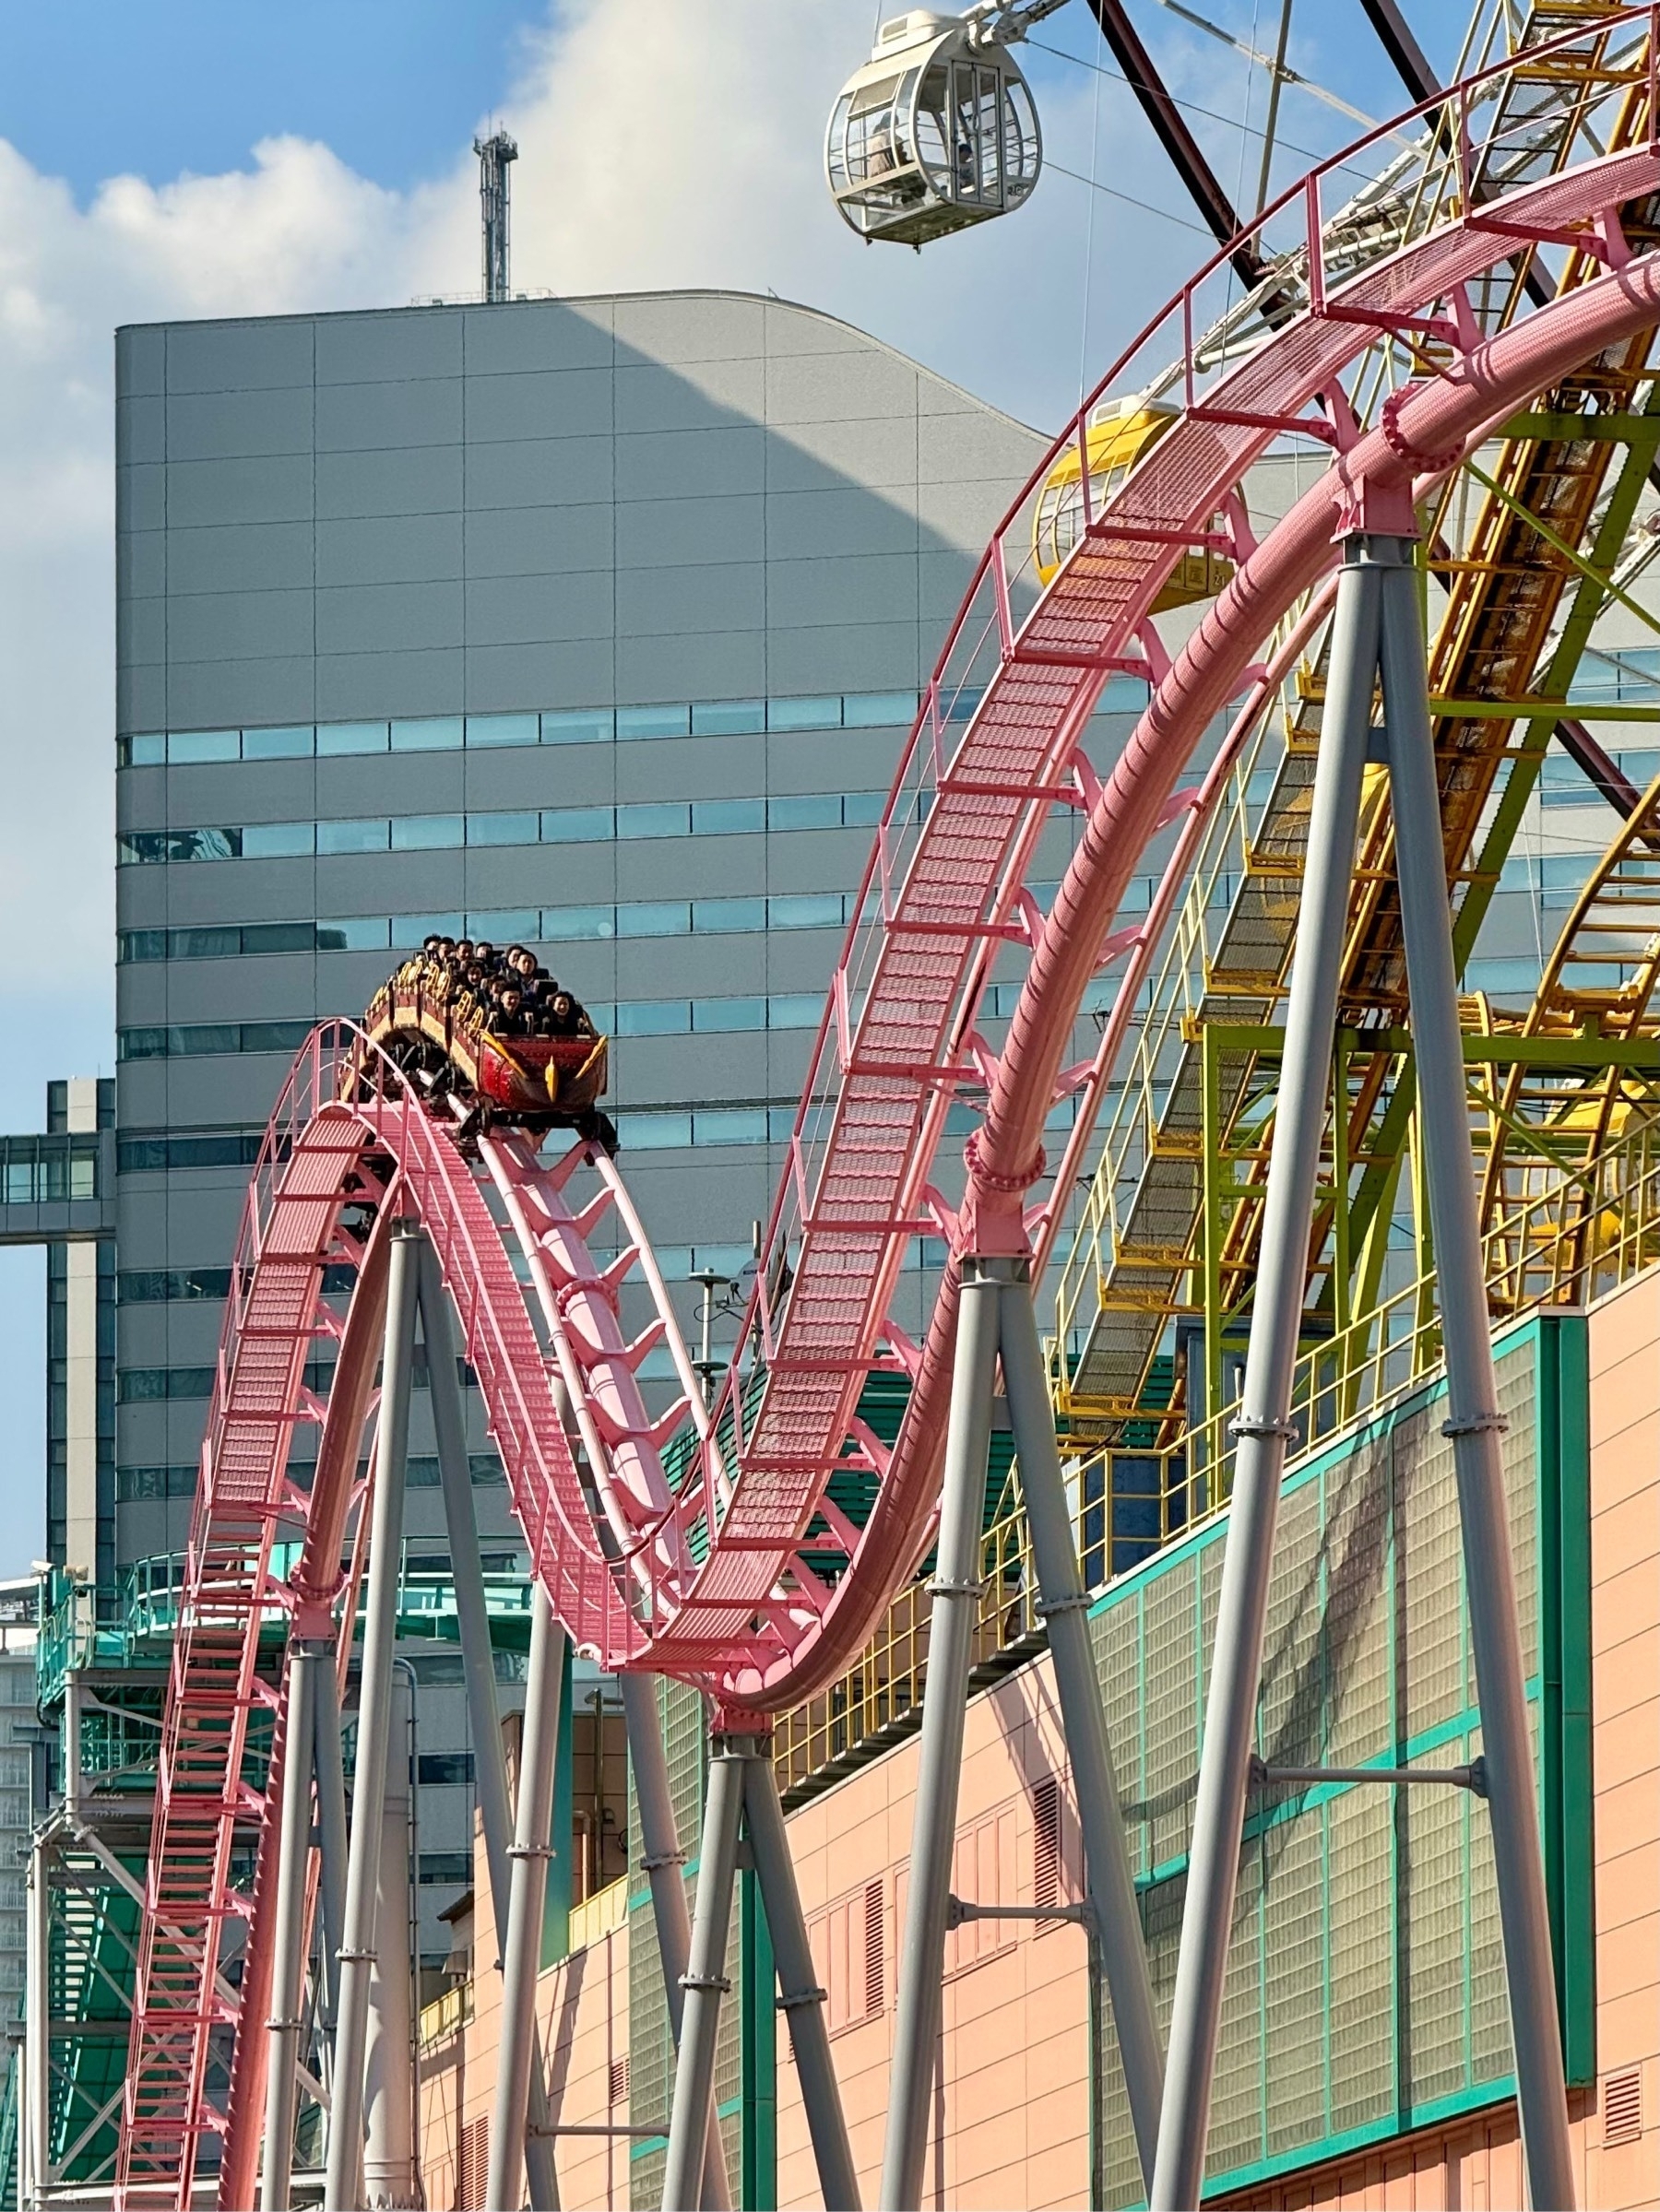 An M-shaped loop of the red Yokohama Cosmo World rollercoaster, with cars full of riders coming over the top of the first crest